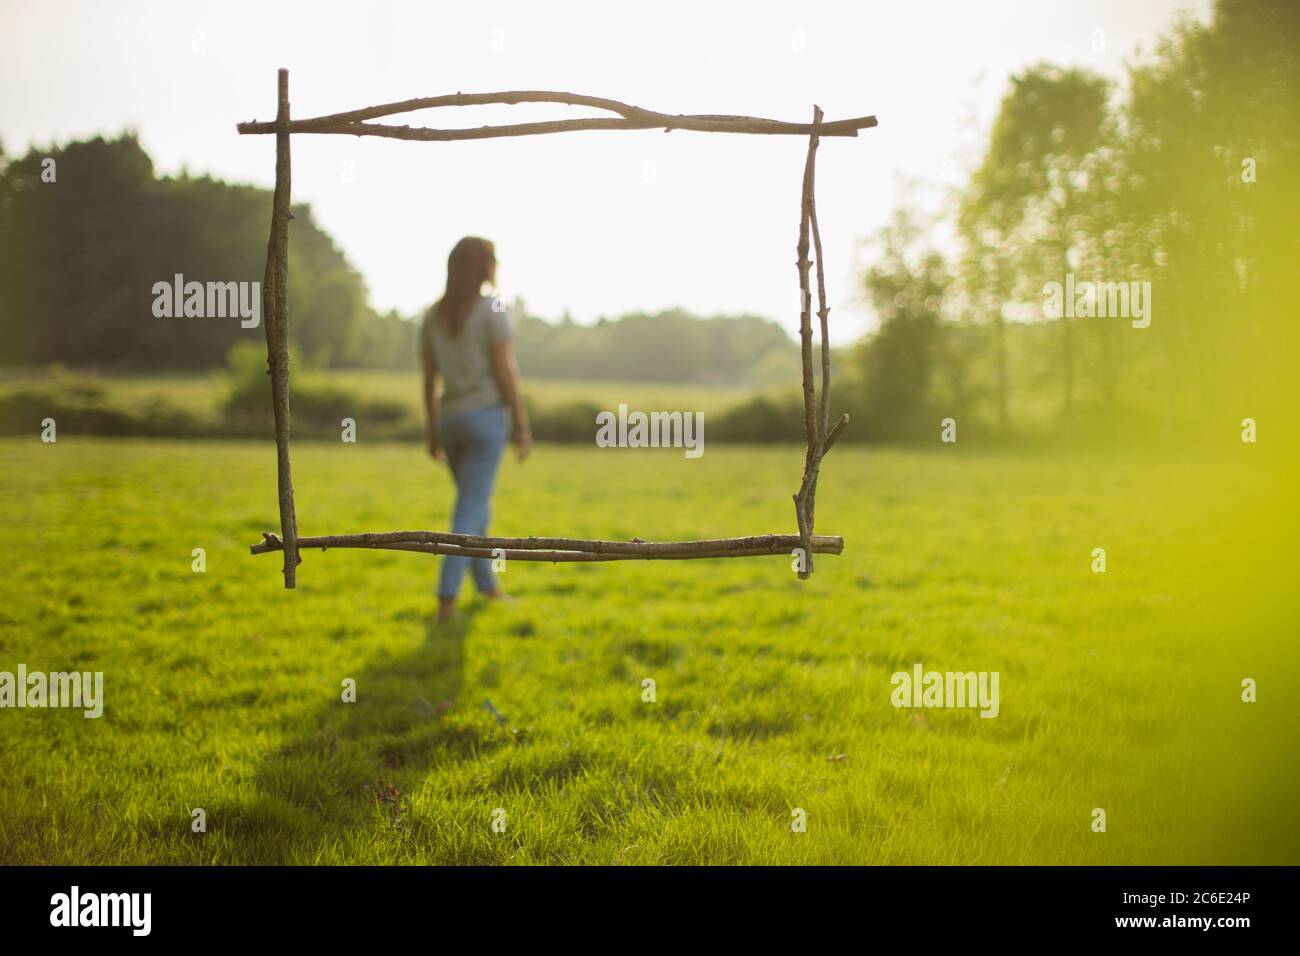 Branch frame over woman walking in idyllic sunny grass field Stock Photo